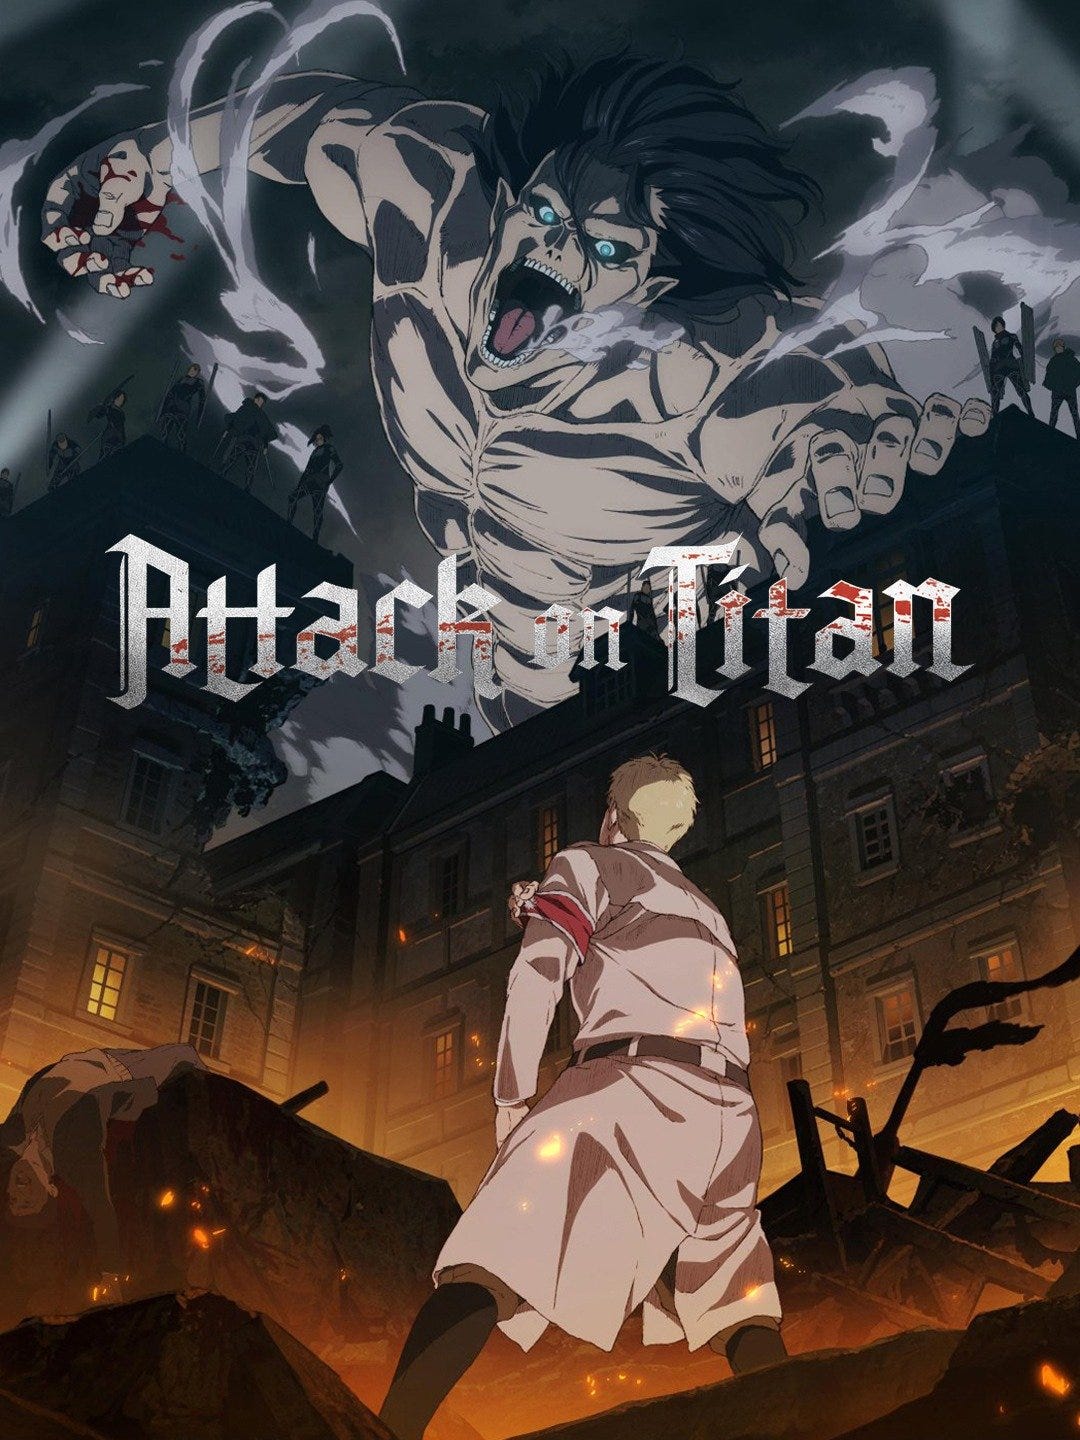 Every Titan Shifter Revealed on the 'Attack on Titan' Anime